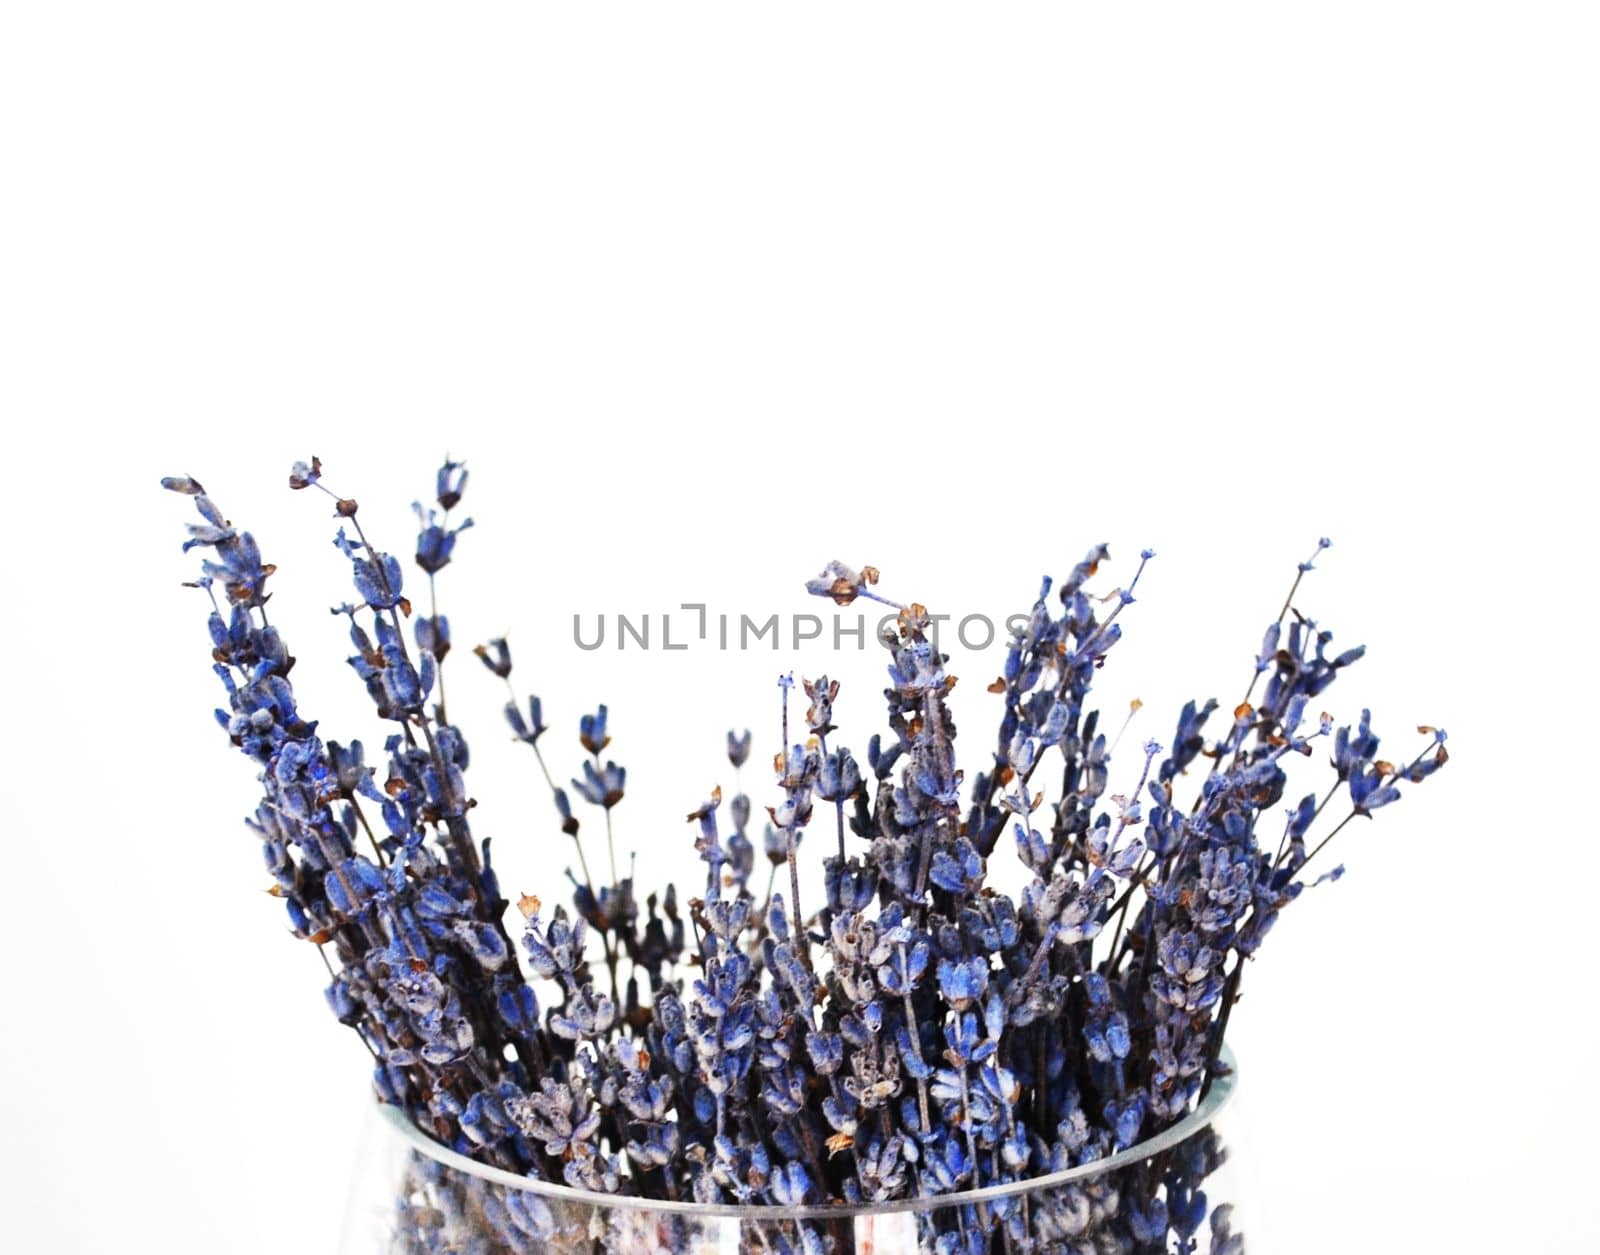 Bouquet of dried lavender. The photo shows a bouquet of dried lavender in a glass vase on a white background.